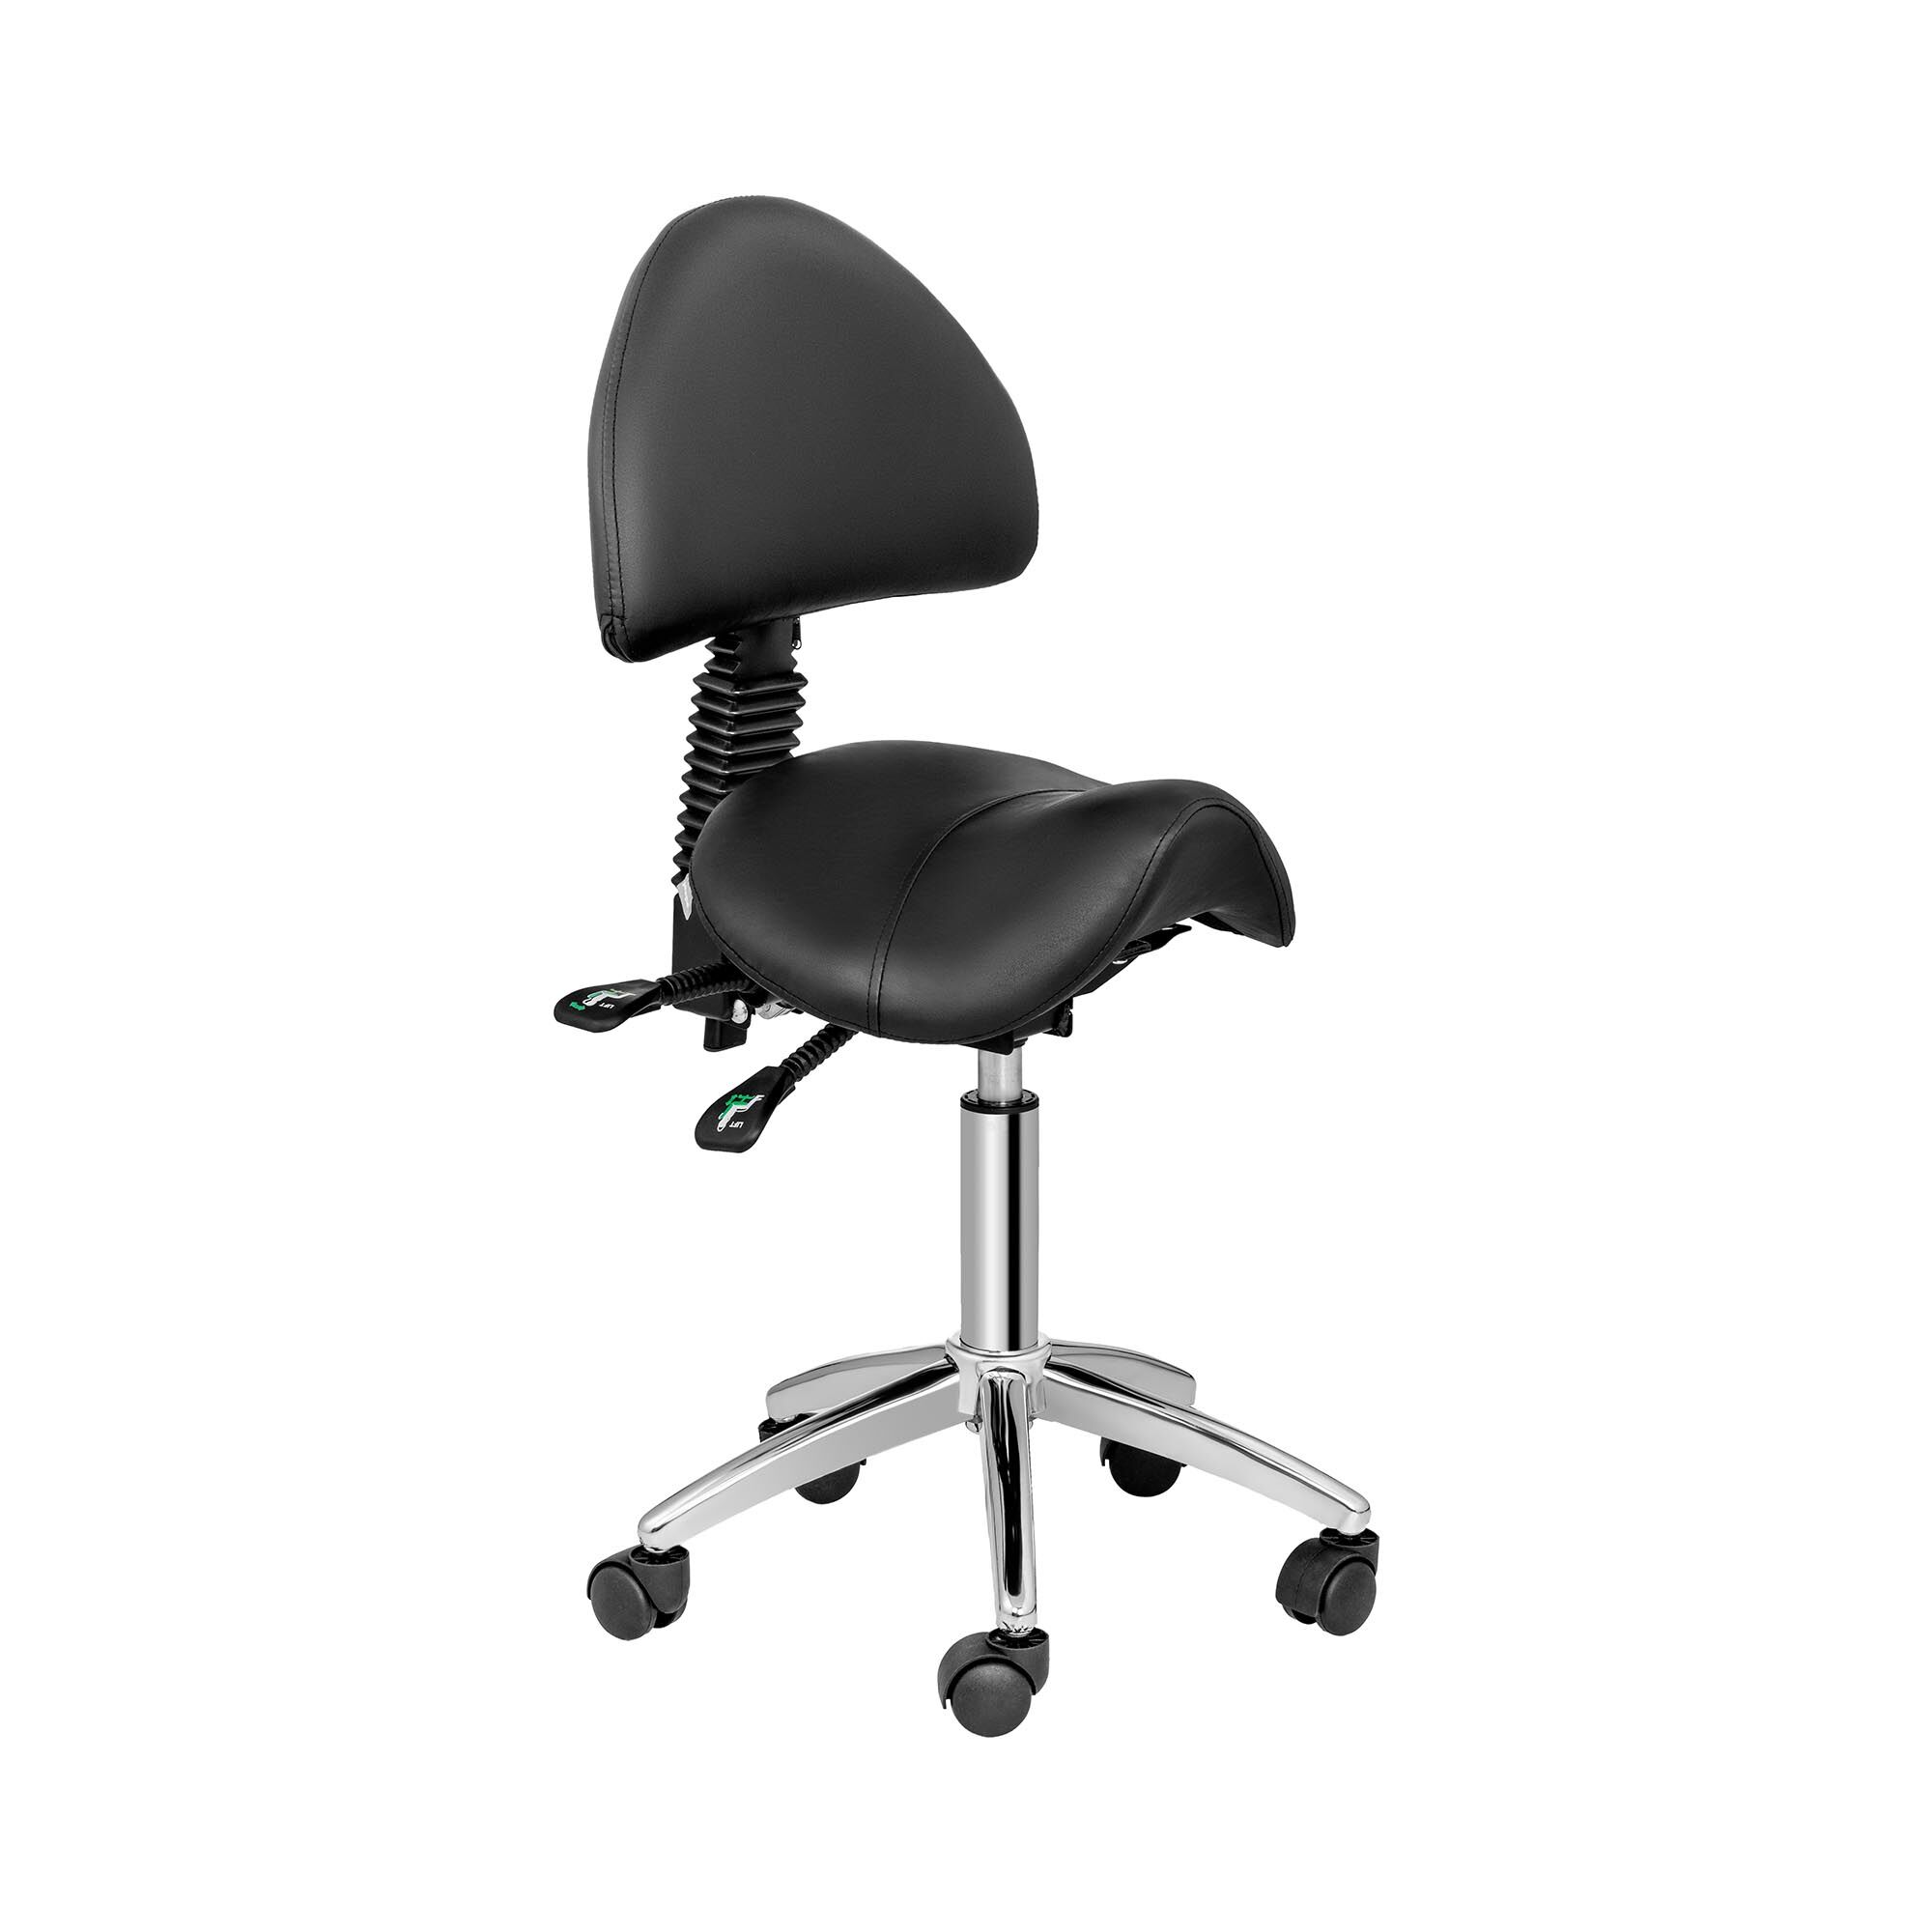 physa Saddle Chair with Back Support PHYSA BERLIN BLACK